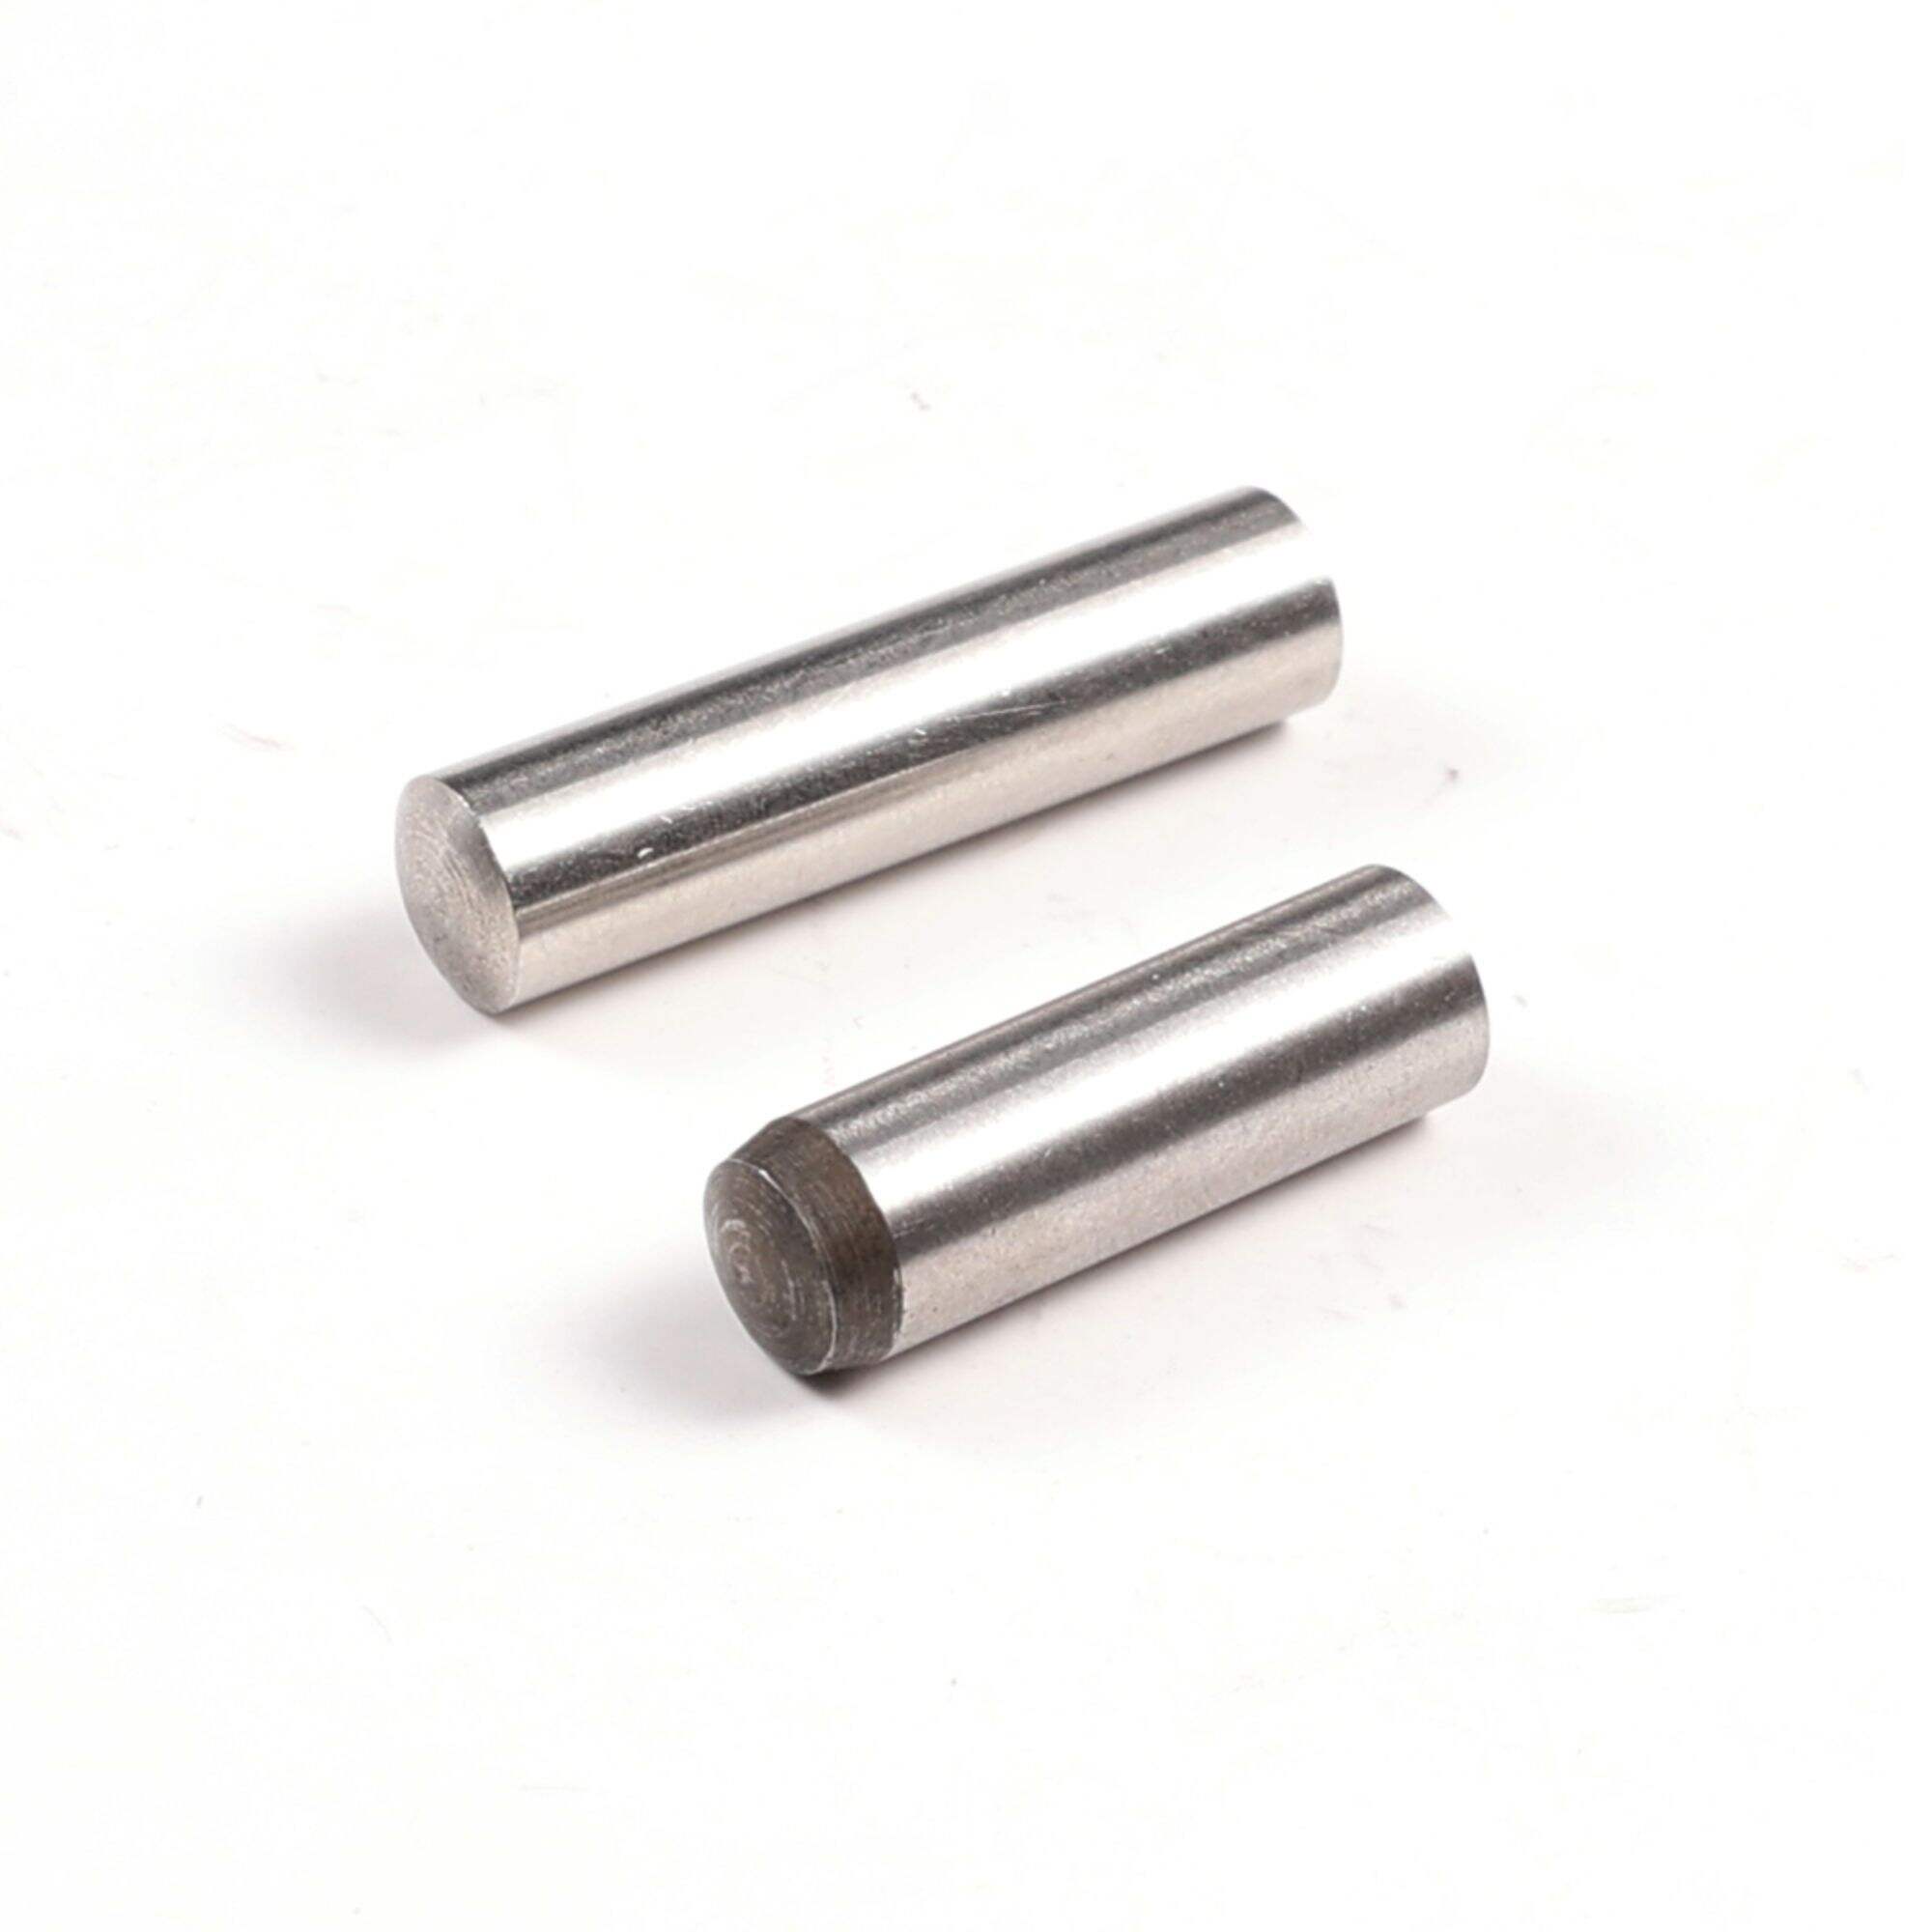  Metal Position Cylindrical Pin Dowel  Wood Threaded Location Stainless Steel Dowel Pin 